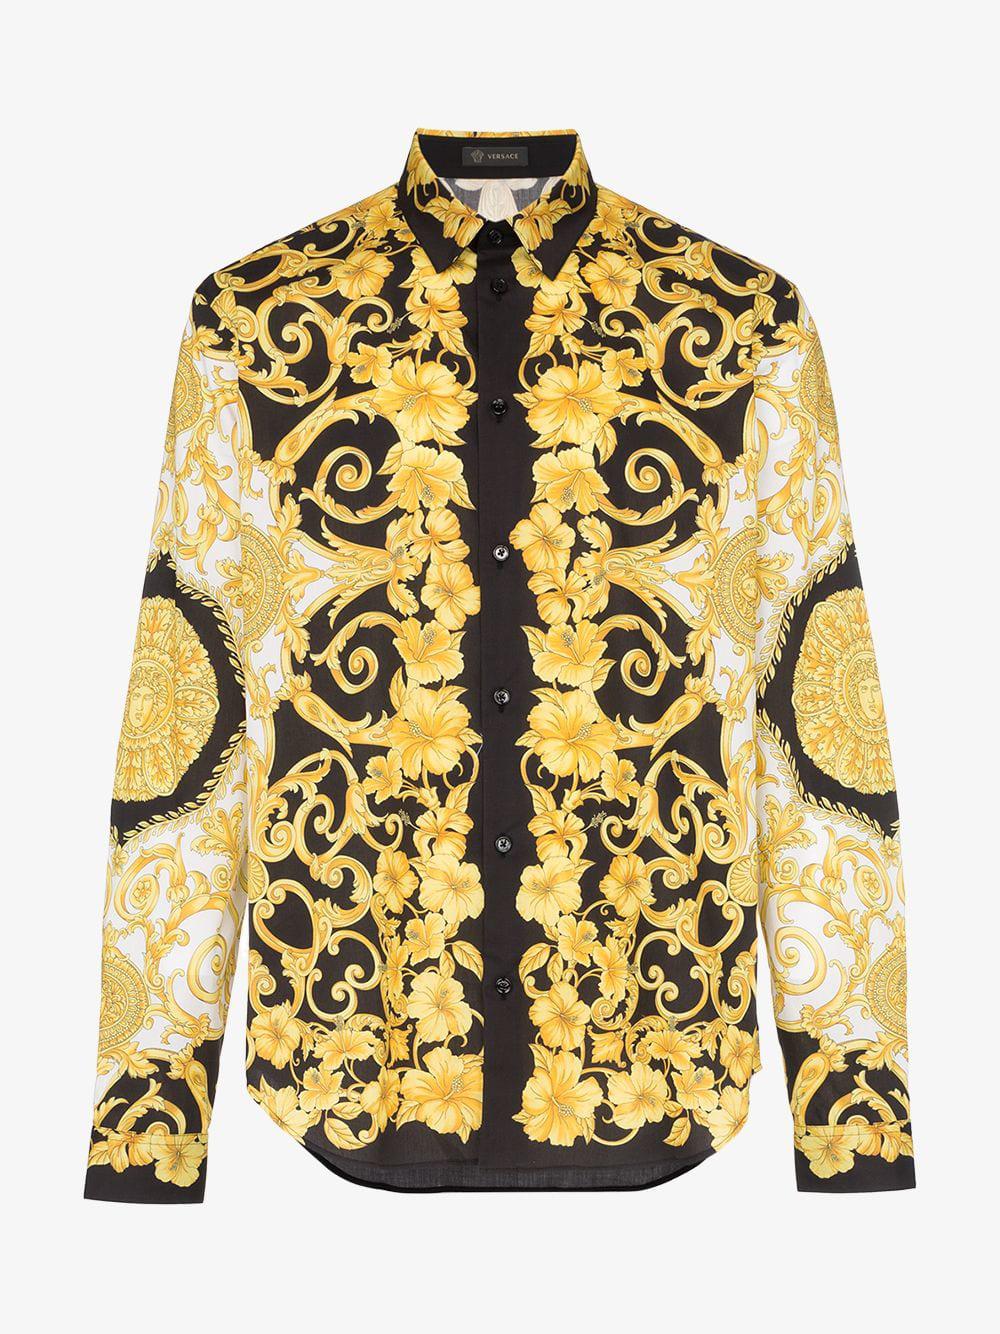 Versace Baroque Print Cotton Shirt in Yellow for Men - Lyst